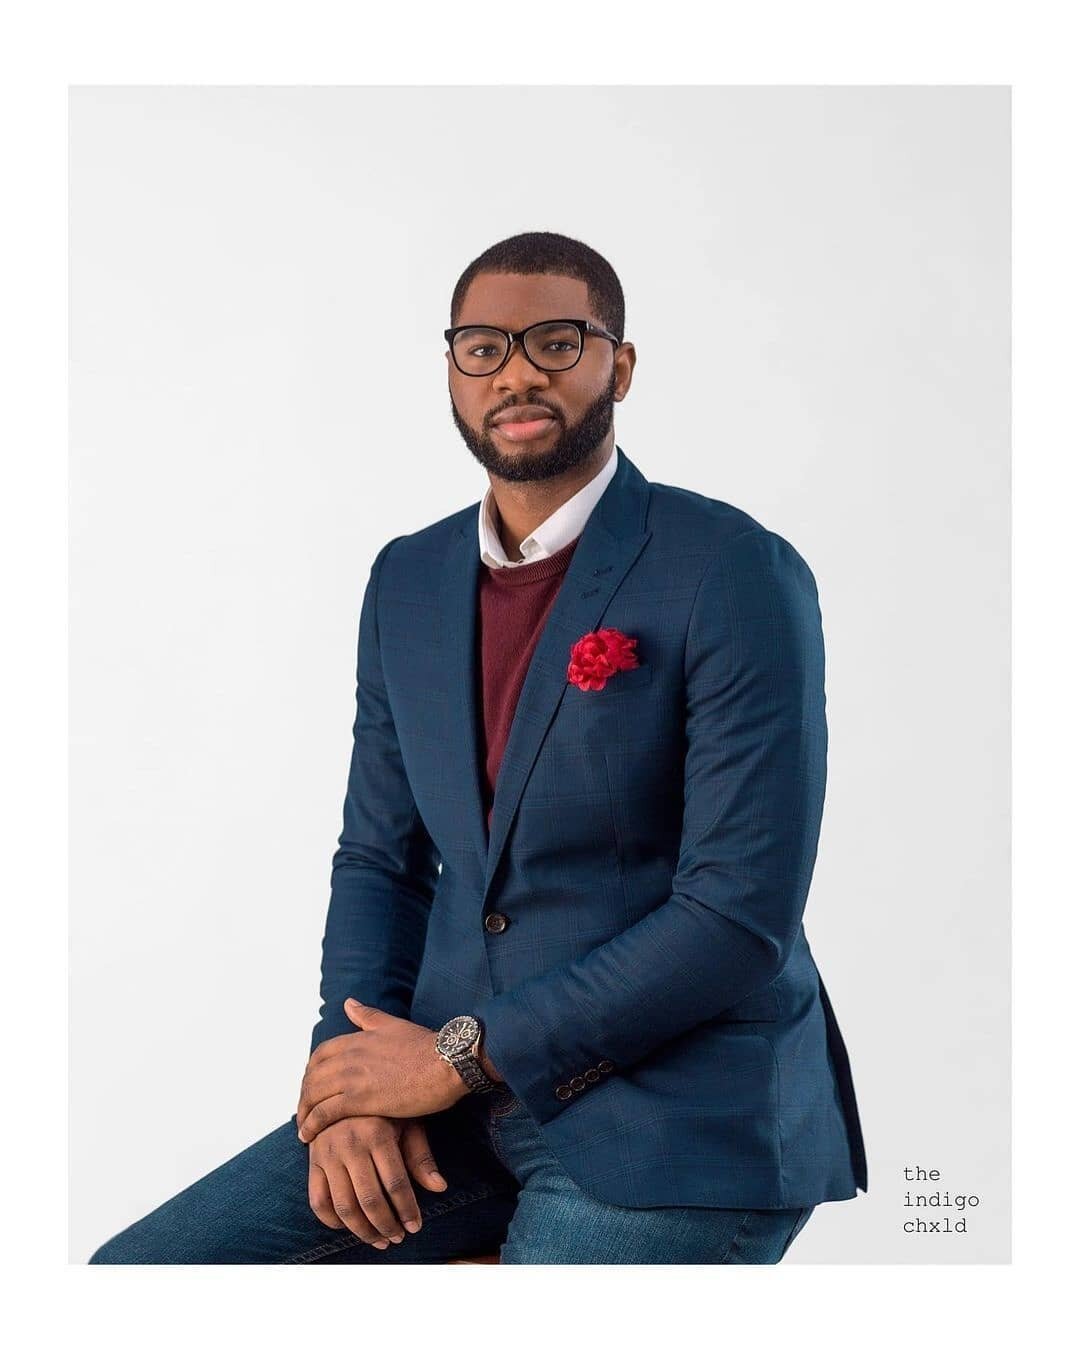 Sending huge congratulations to our +SocialGood Connector and cofounder of @socialgoodlagos, Abrham Ologundudu @iamoabraham, who recently completed a master's program at the @sussexuni as a @cheveningfcdo scholar! 

We are so proud of you, Abraham! K